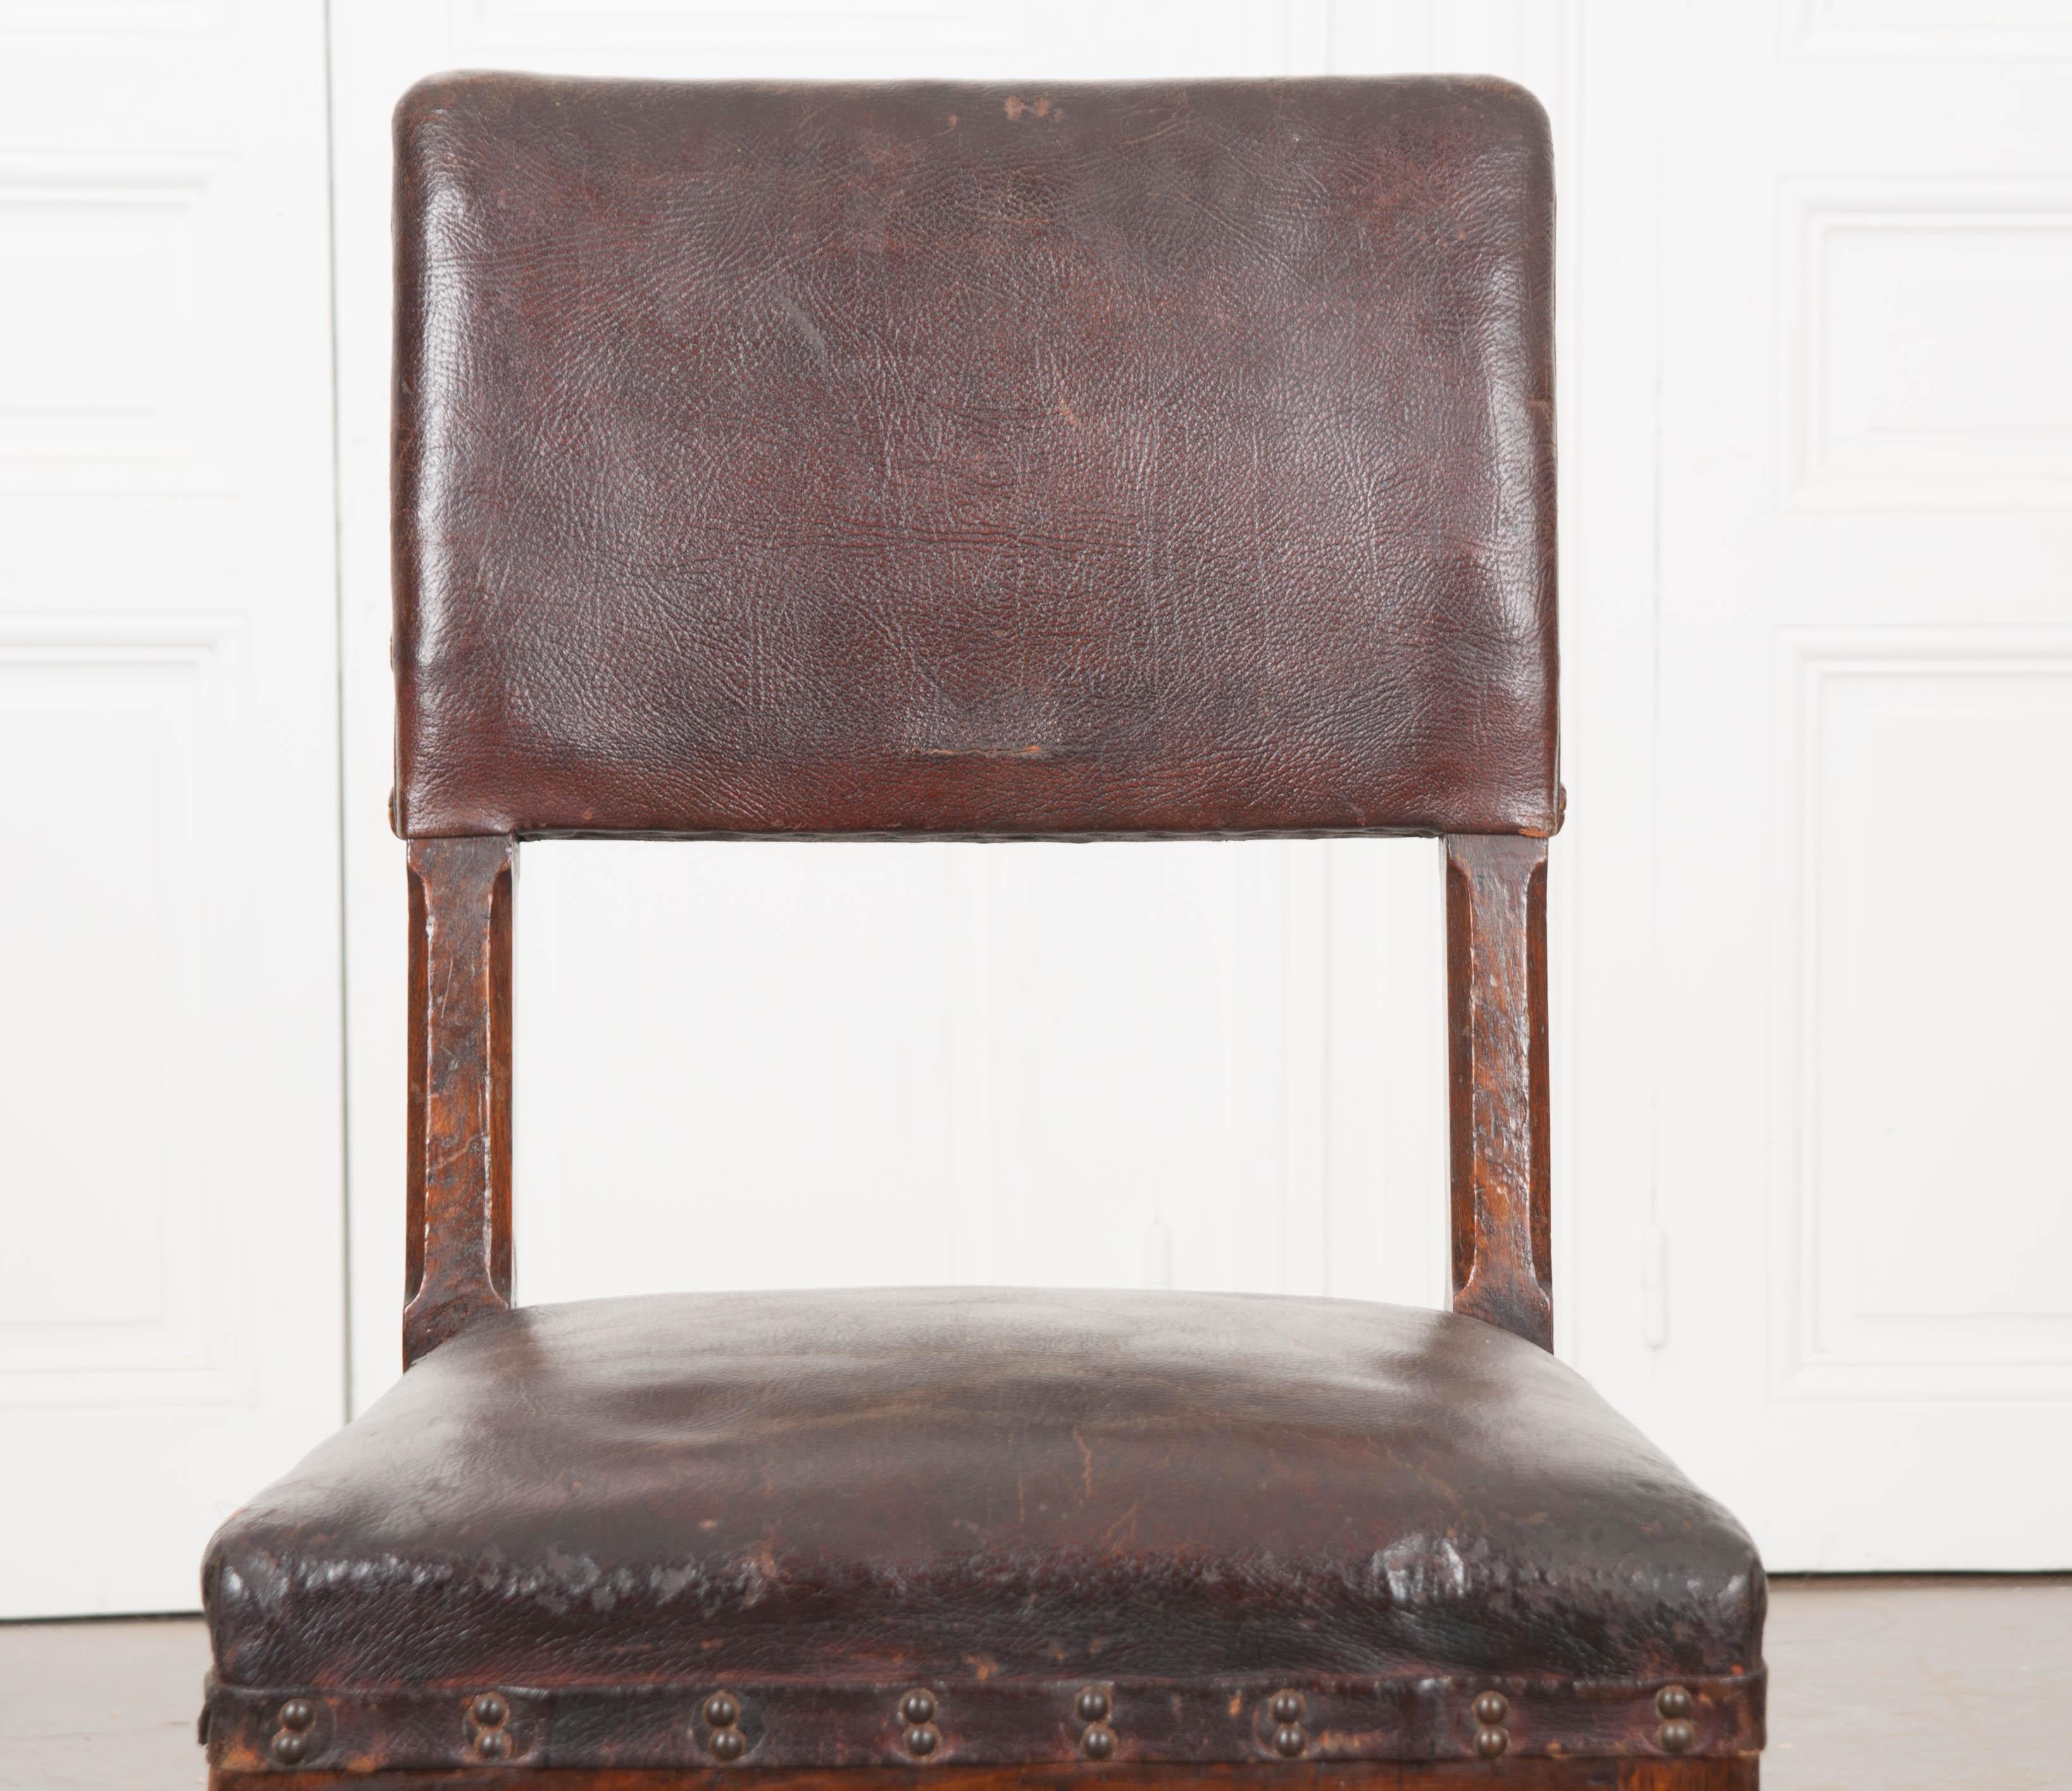 This handsome 19th century English oak desk chair, circa 1860s, features the original leather upholstery and an incredible rich patina. The padded chair back, with large decorative nail heads (several lacking), has a rear pierced handle and sits